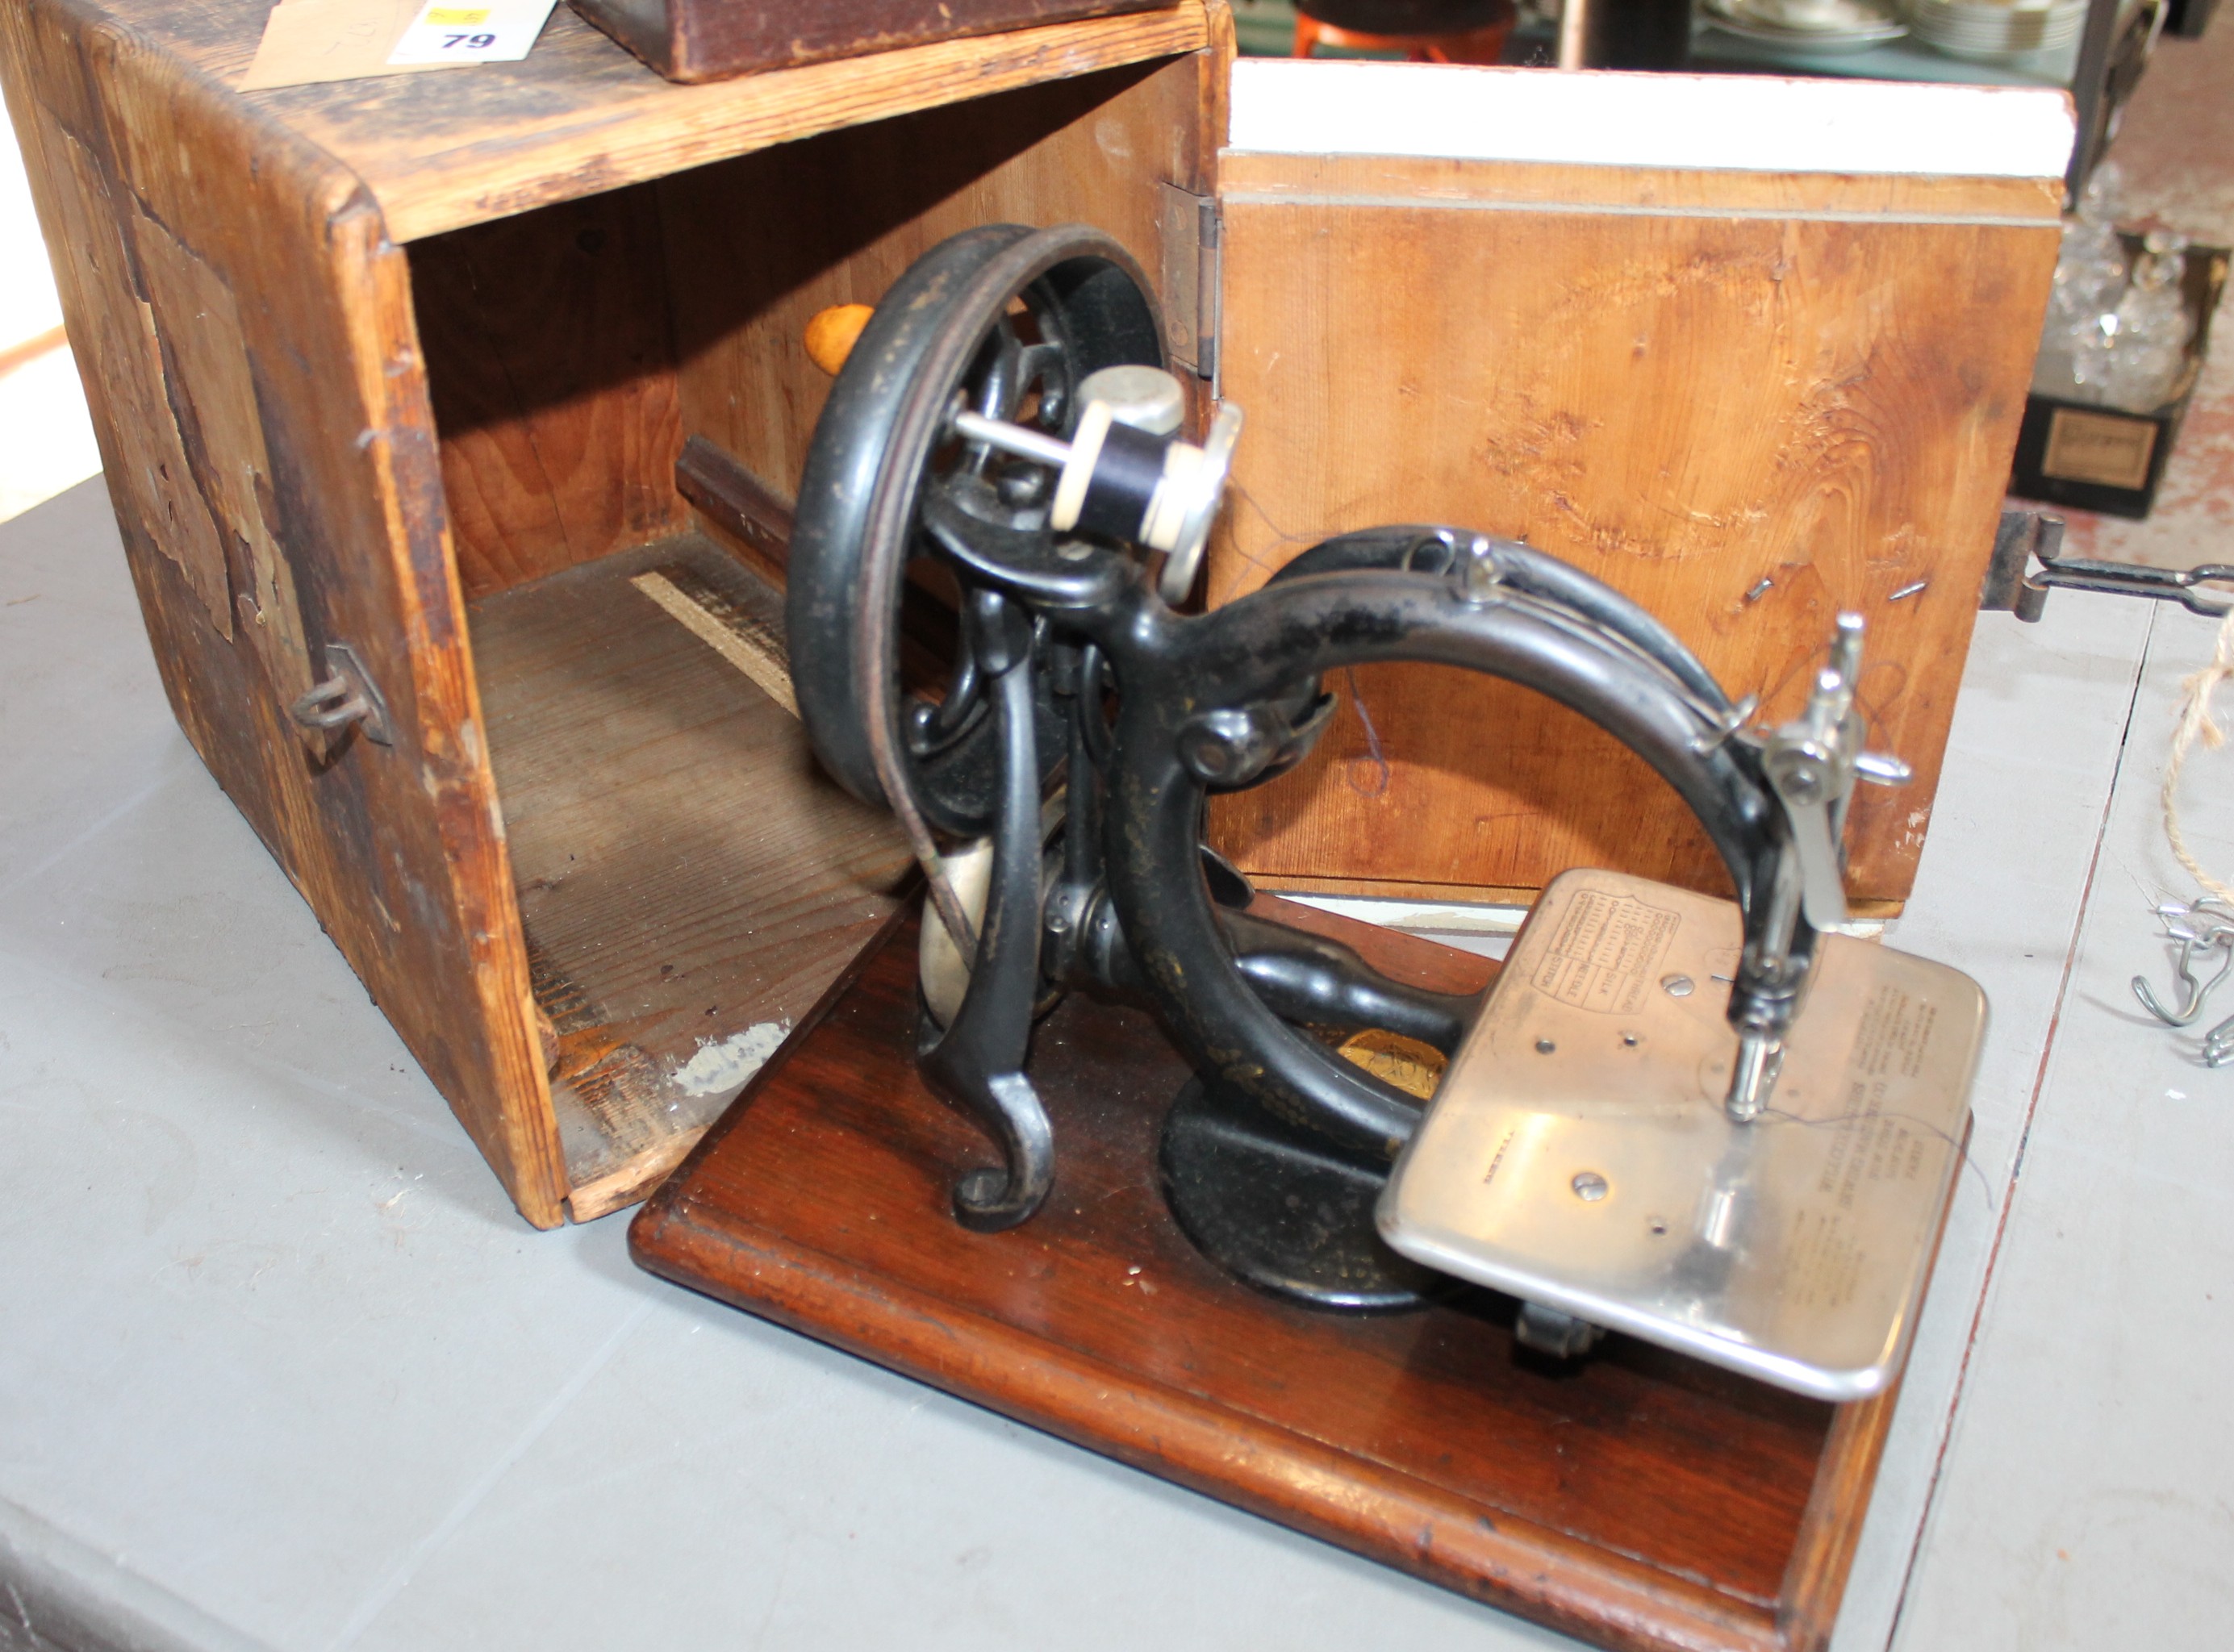 A Wilcox & Gibbs sewing machine with wooden box